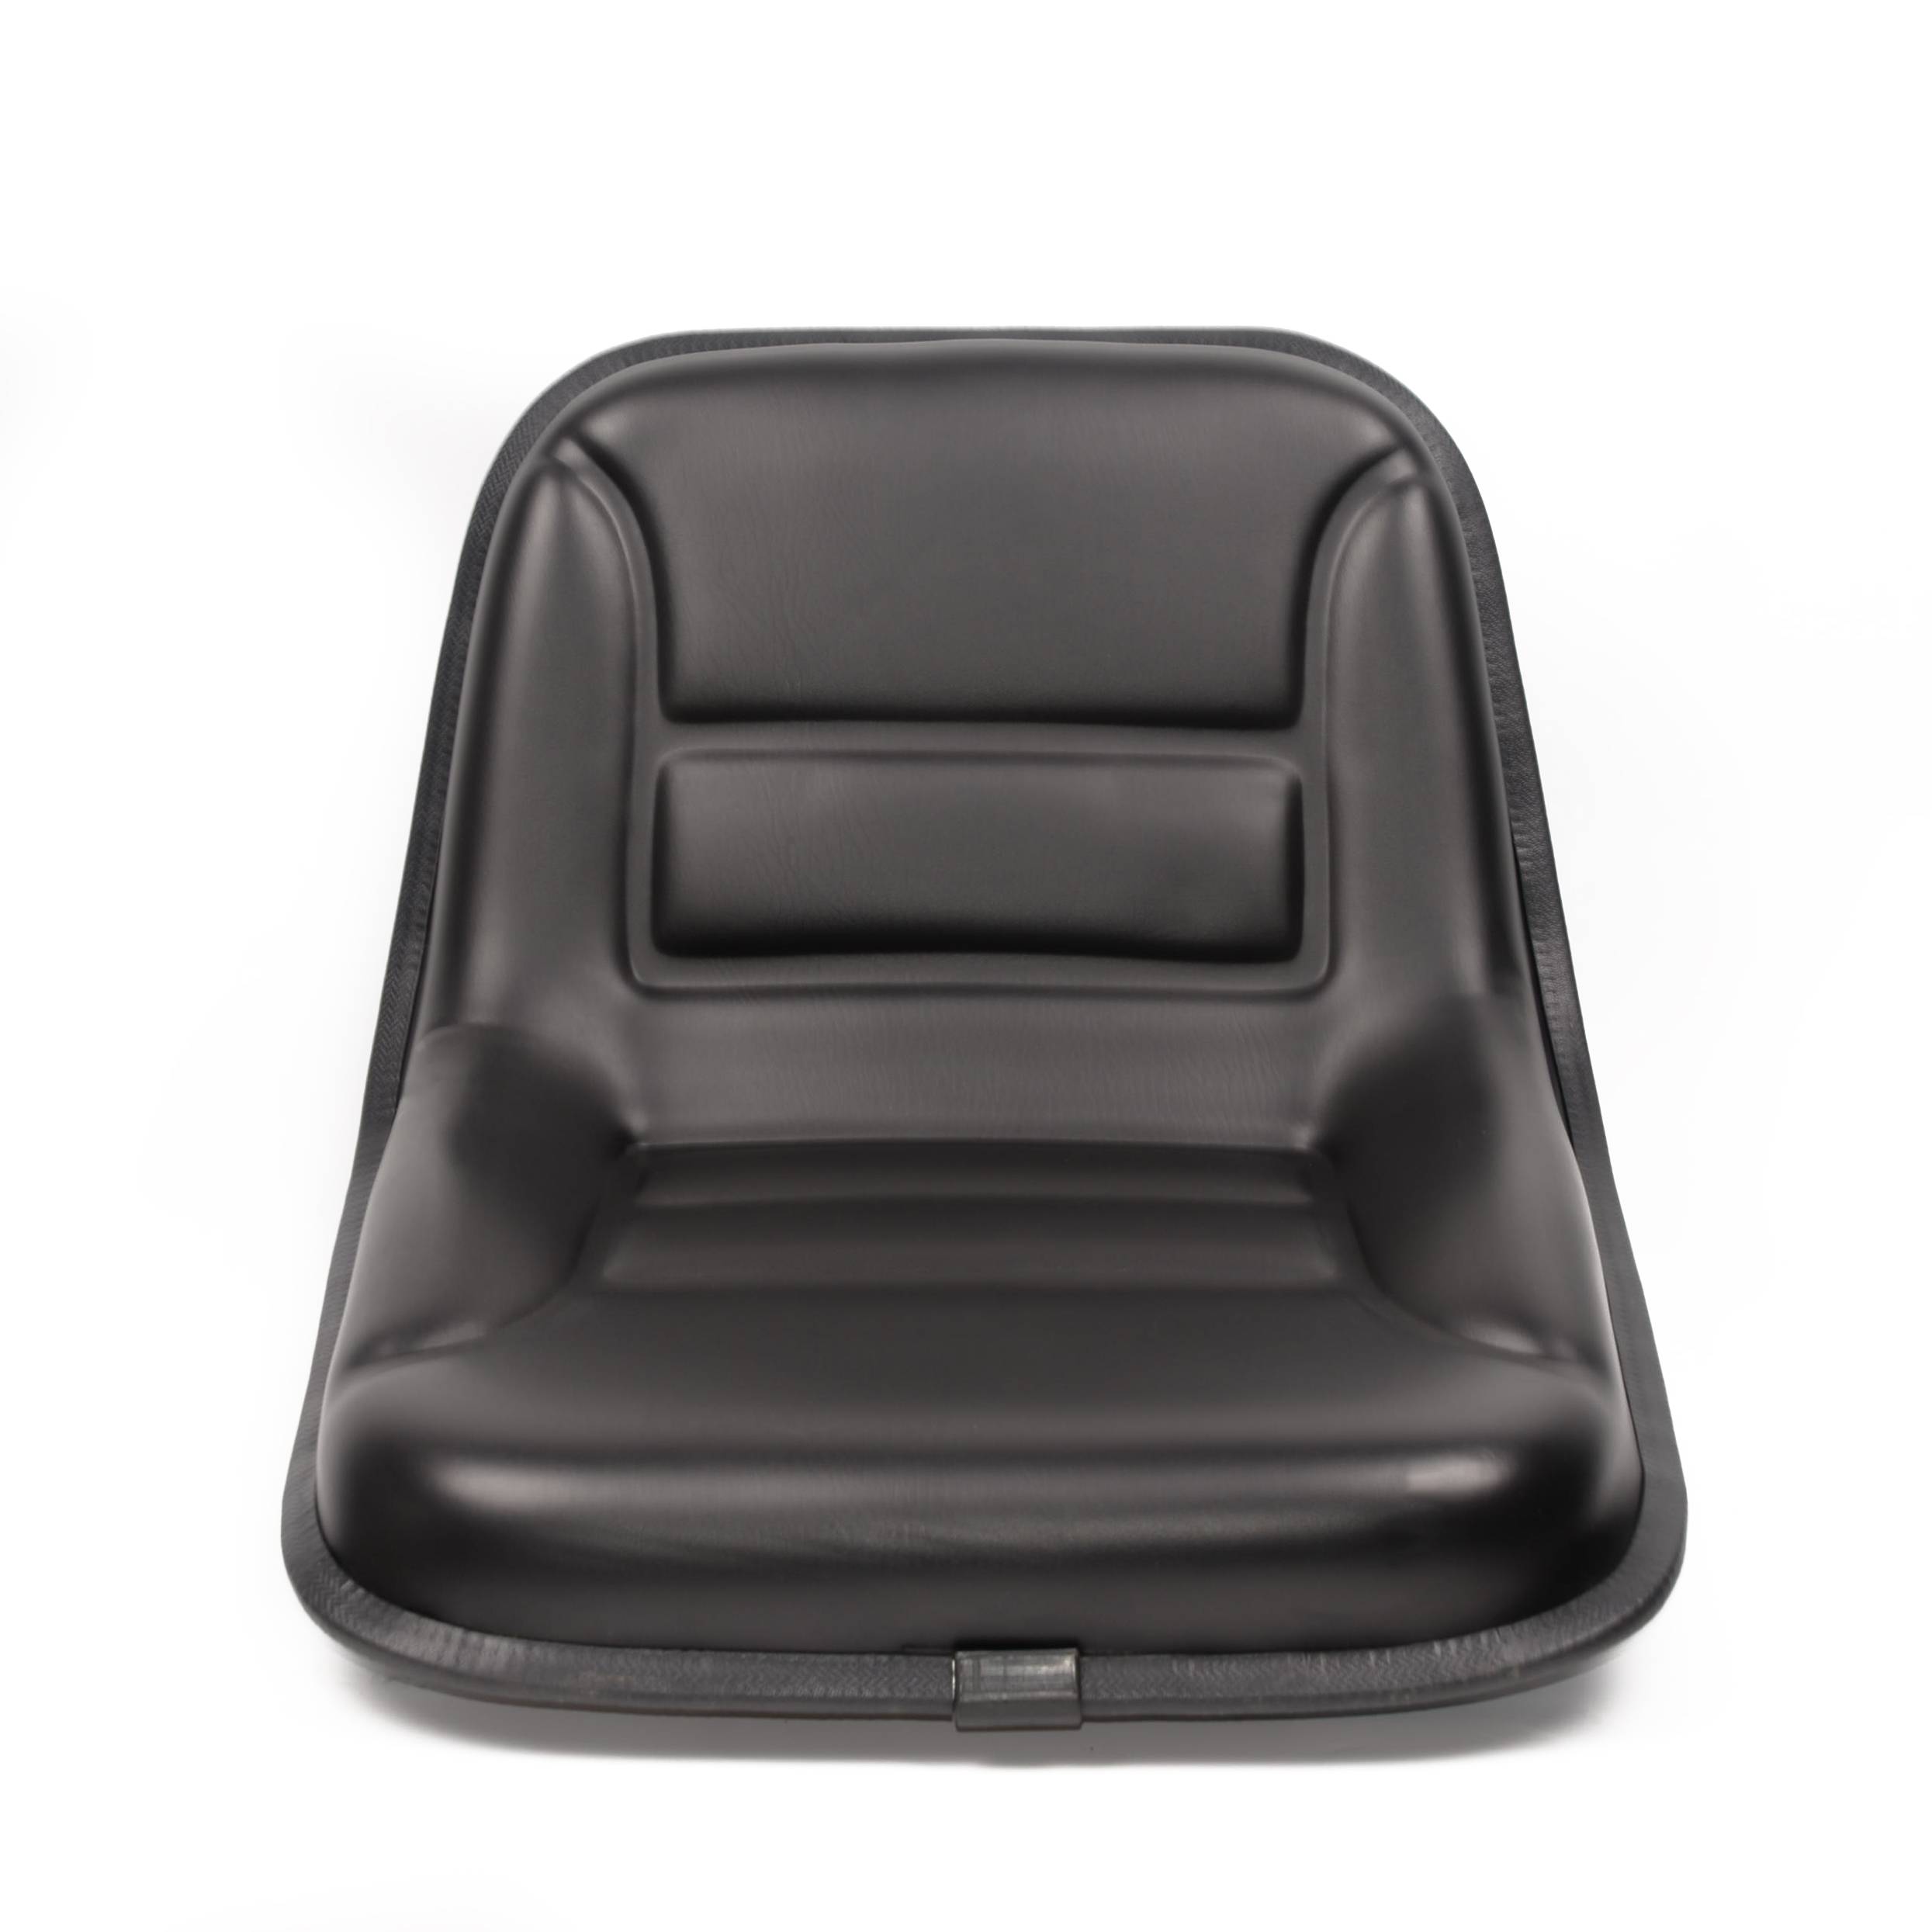 Special Design for Spring Seat Suspension - YY29 Universal farm tractor seat – Qinglin Seat